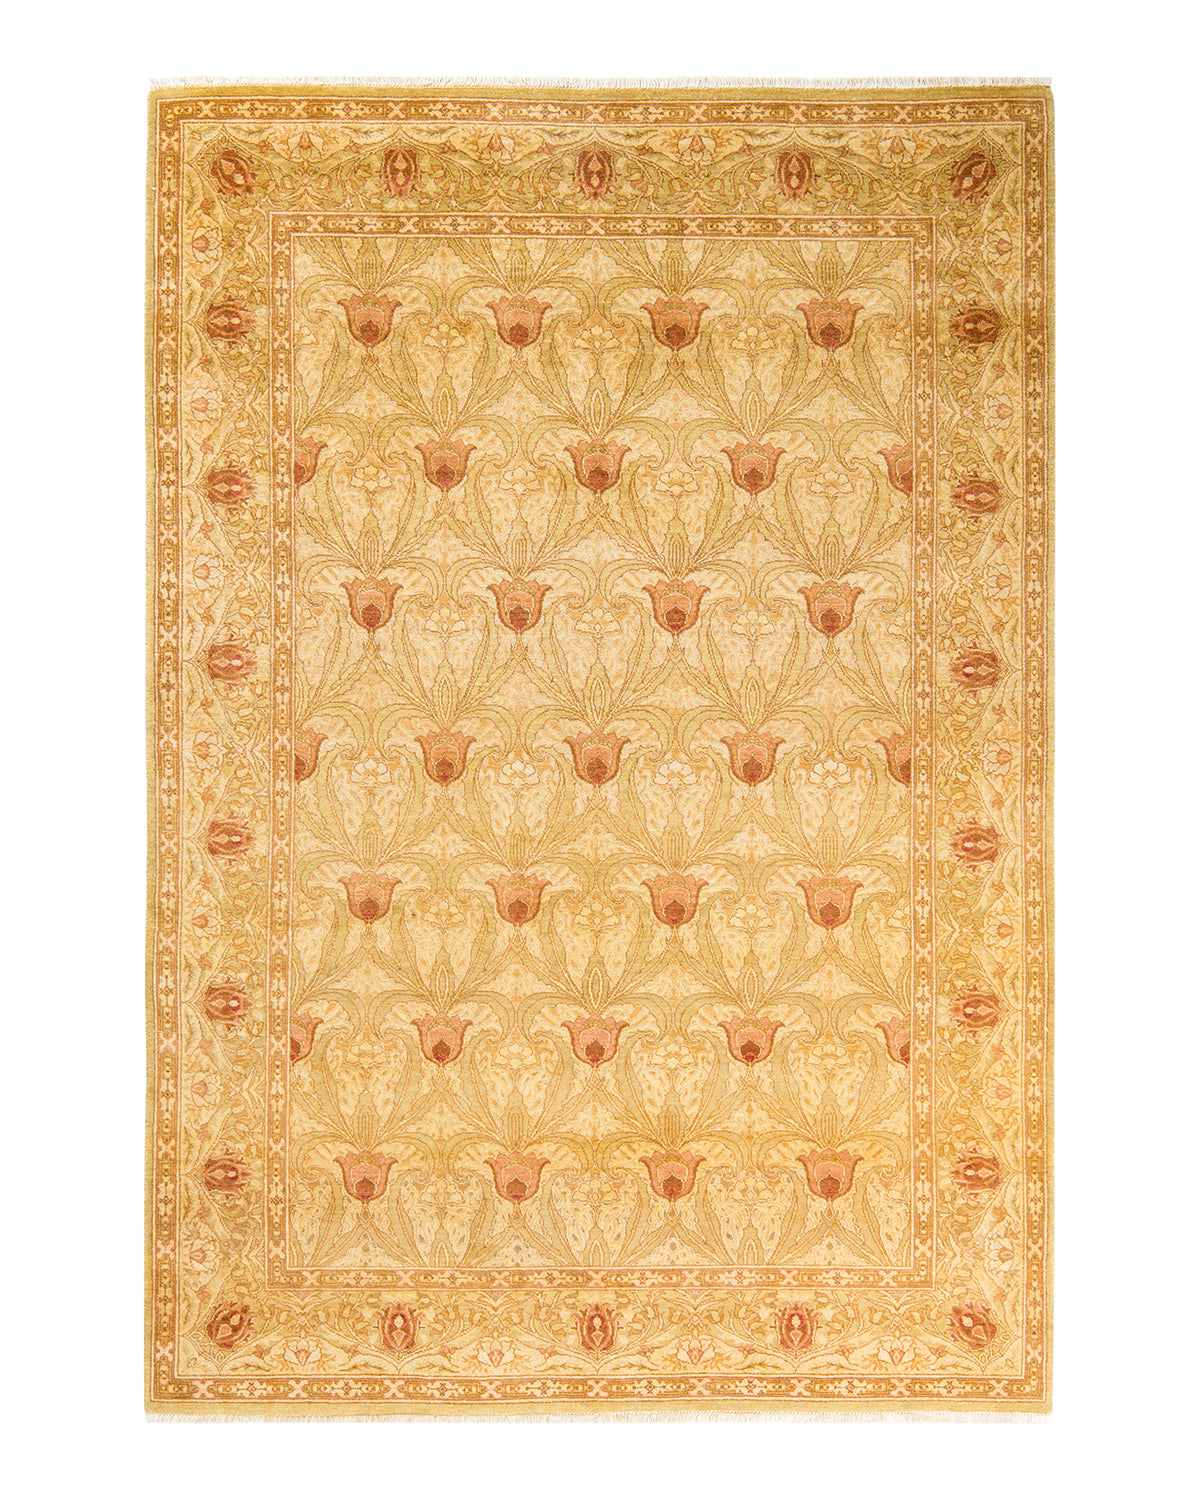 Eclectic, One-of-a-Kind Hand-Knotted Area Rug  - Yellow, 6' 0" x 9' 0"